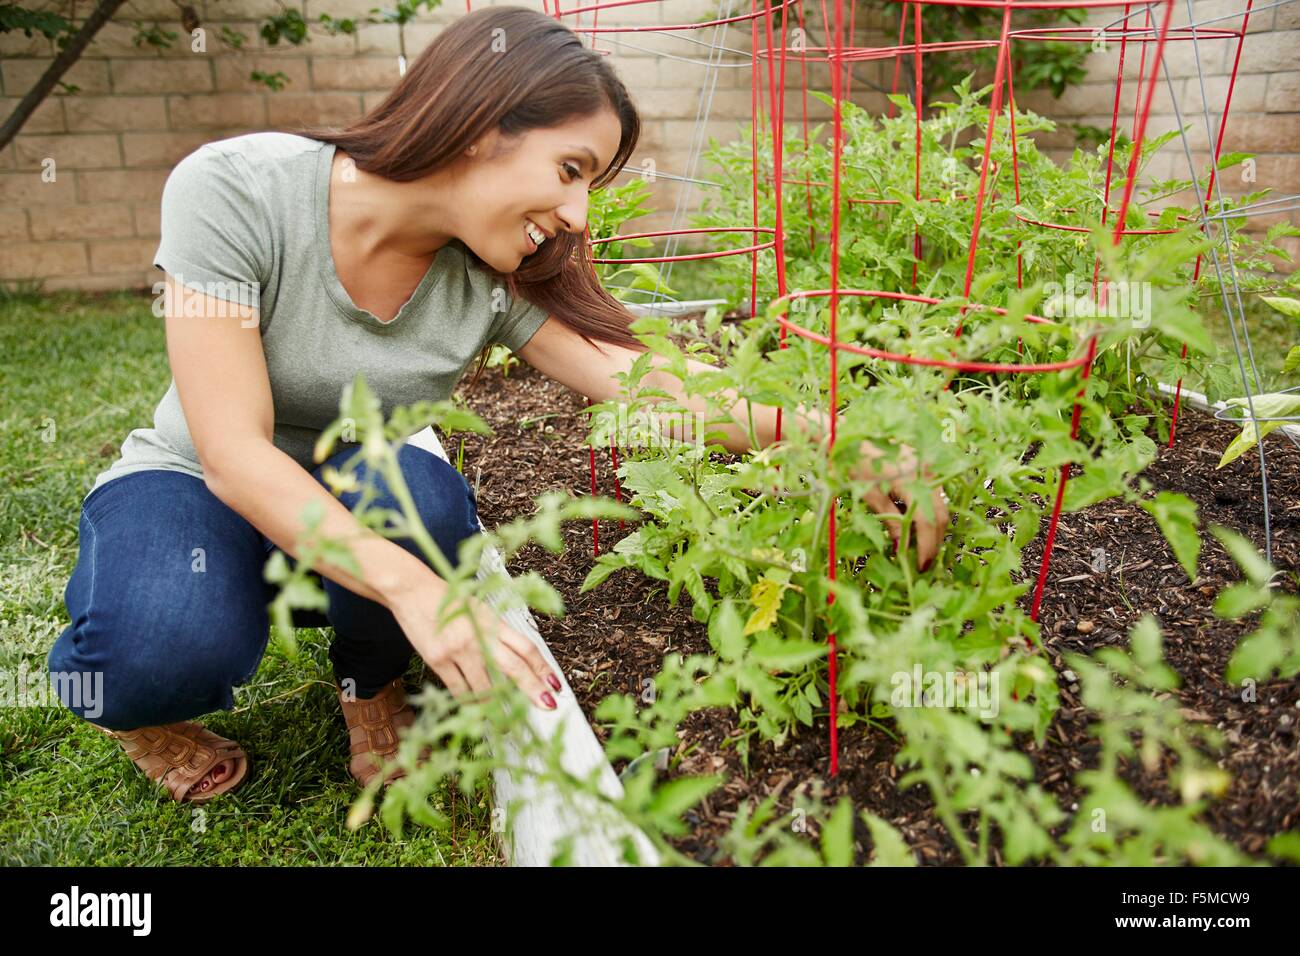 Woman working in garden bed Banque D'Images